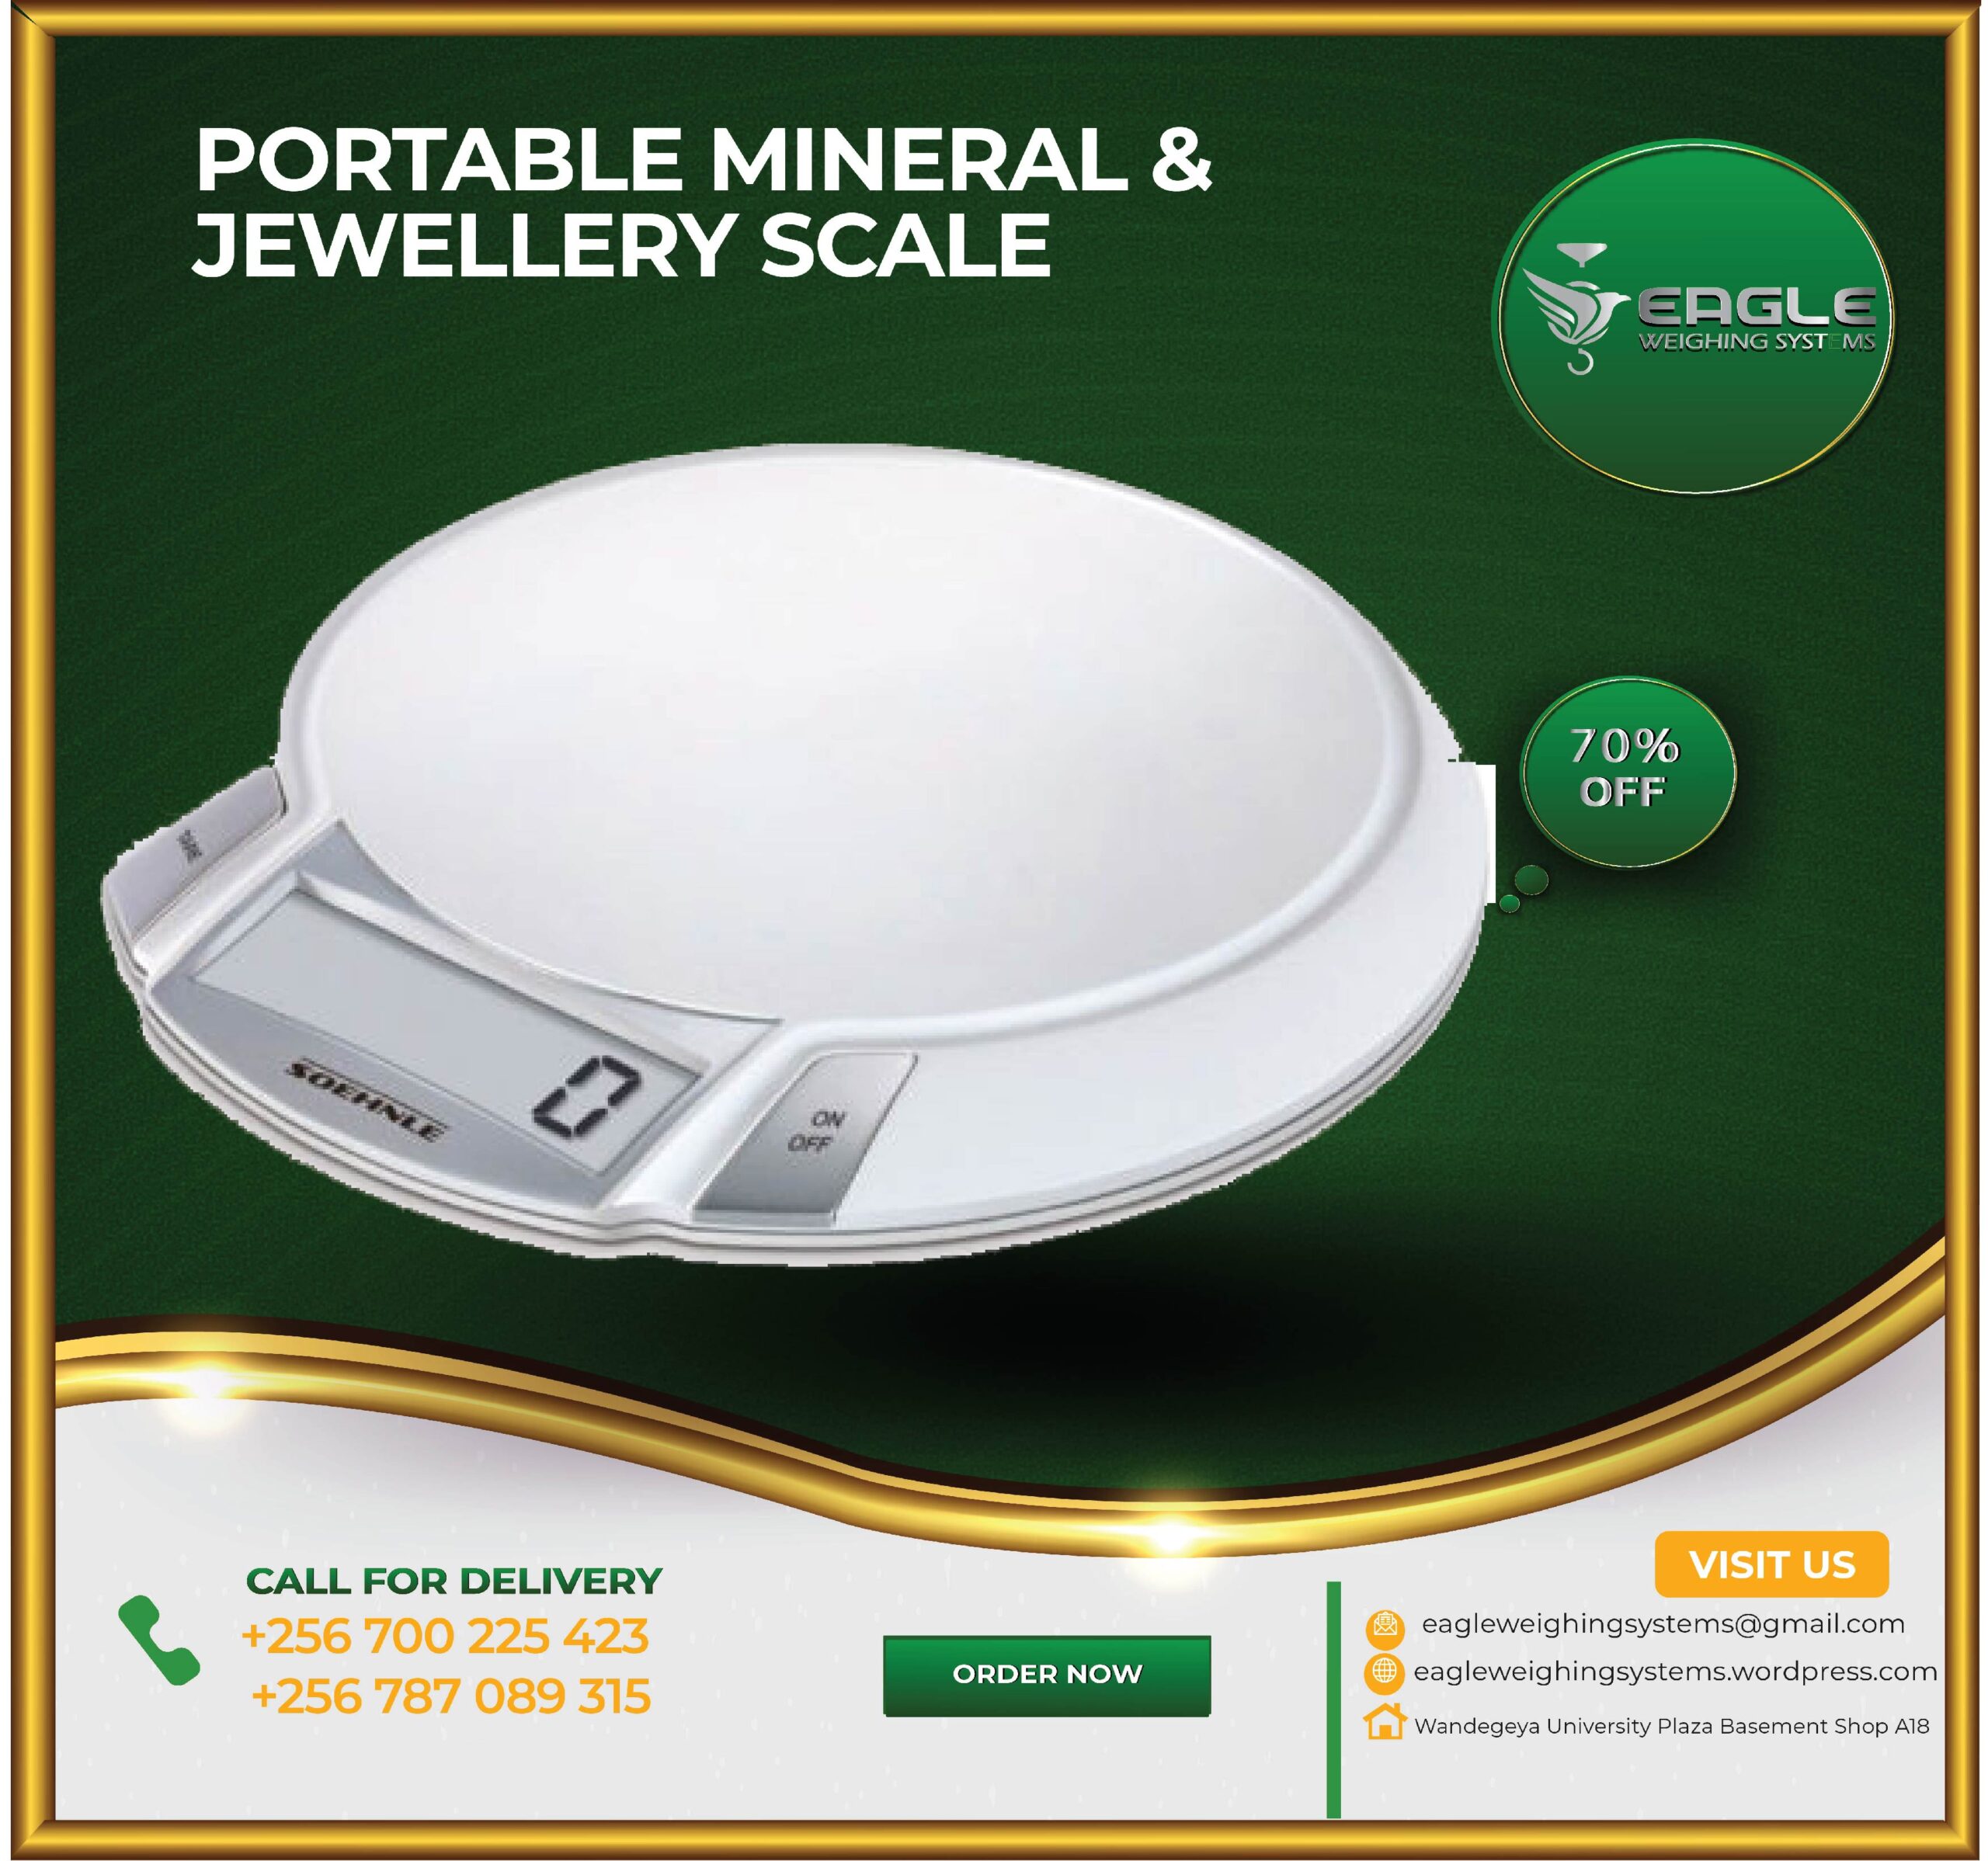 Jewellery scales for sale in Kampala